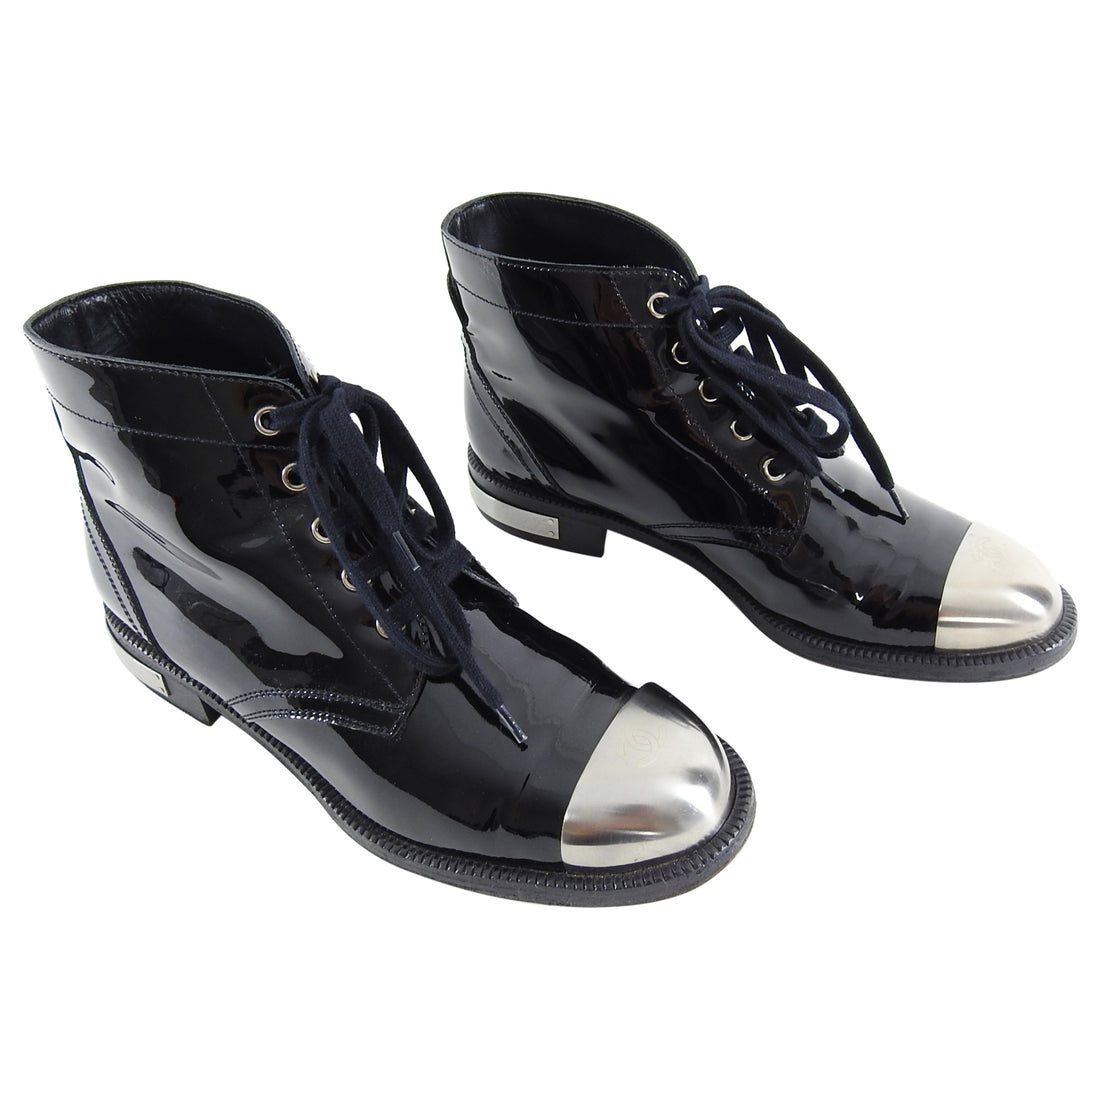 Chanel - Authenticated Ankle Boots - Patent Leather Black Plain for Women, Very Good Condition